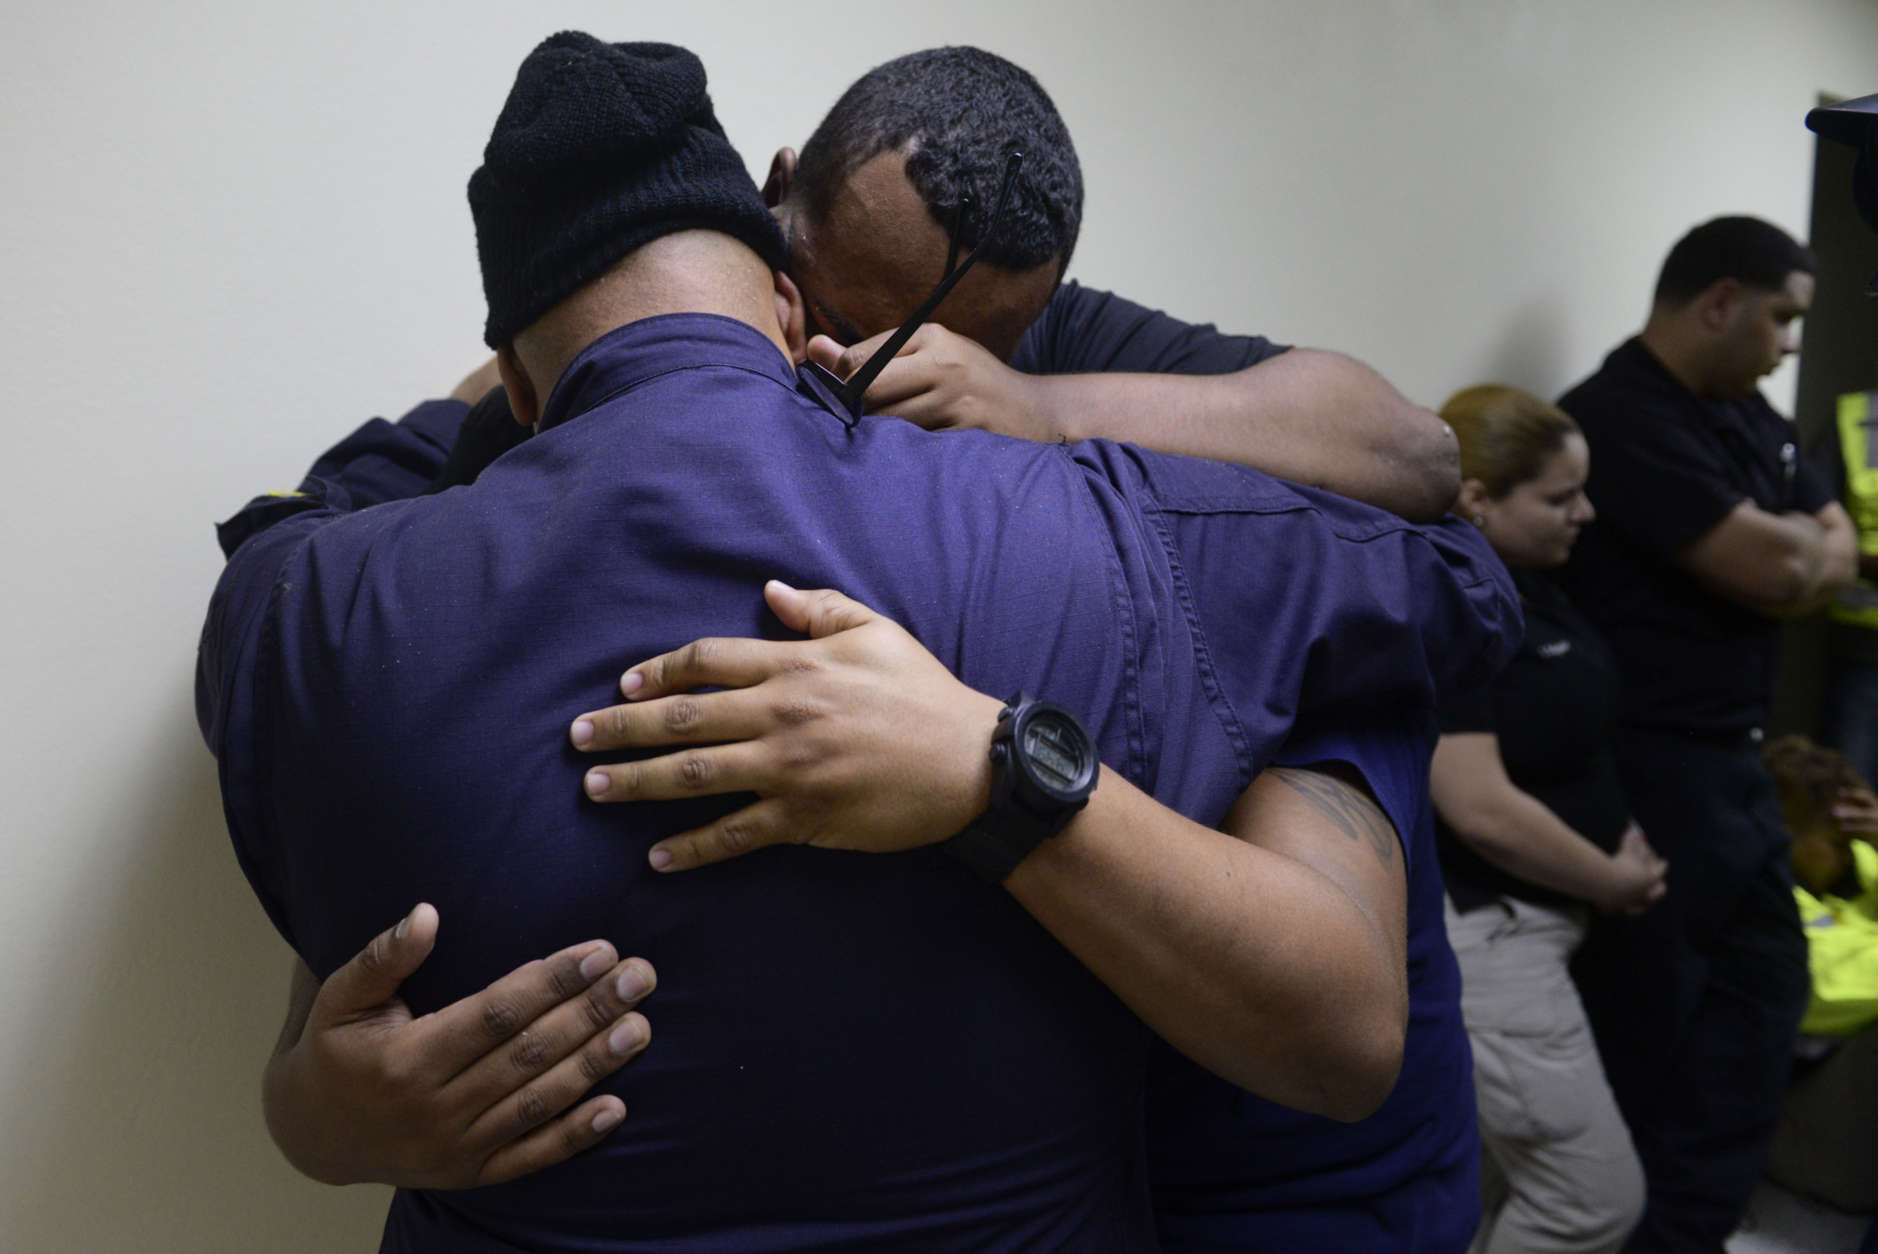 Feelings of frustration surround the members of the rescue team from the municipality of Humacao, desperate to go out to attend several calls for help from citizens in need of assistance during the impact of Maria, a Category 5 hurricane that started to hit the eastern region of the island, in Humacao, Puerto Rico, Tuesday, Sept. 20, 2017. At that point, Maria downgraded to a category 4 hurricane. (AP Photo/Carlos Giusti)